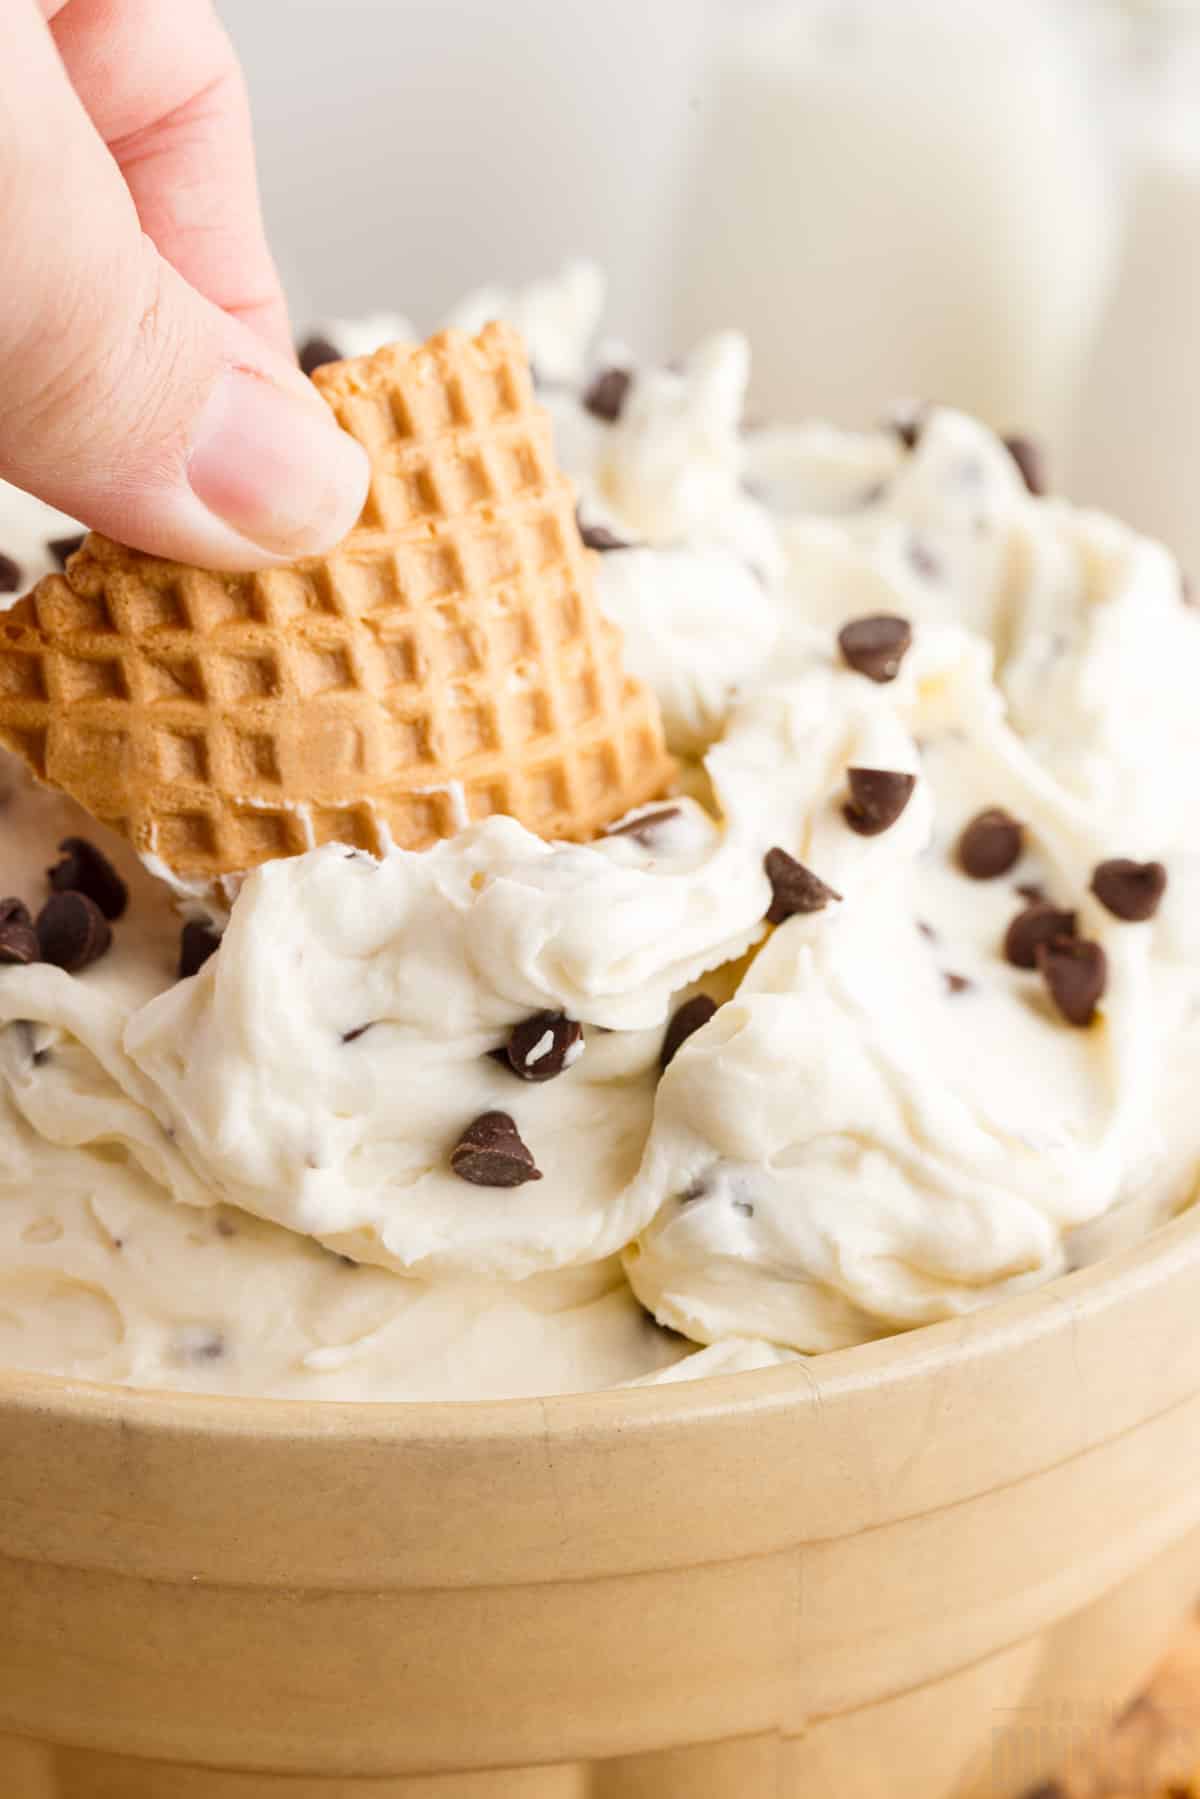 Piece of waffle cone being dipped into cannoli dip.